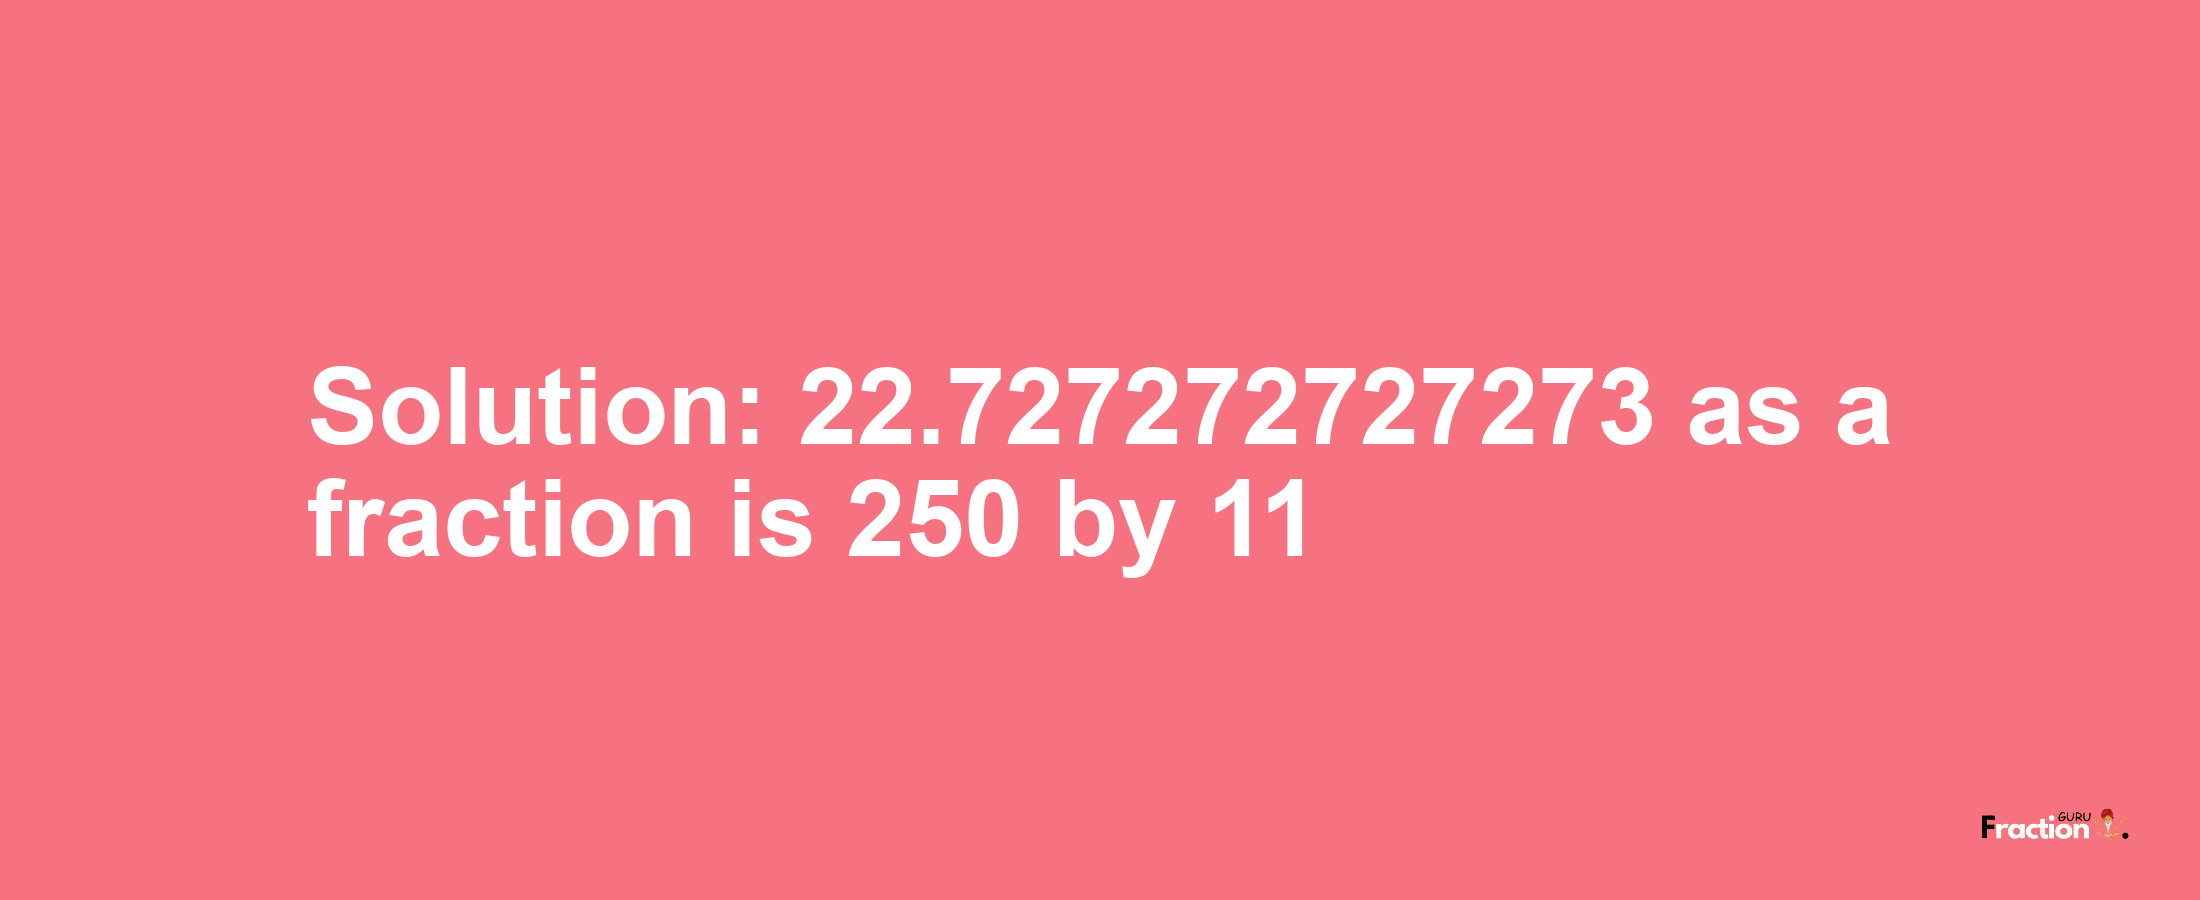 Solution:22.727272727273 as a fraction is 250/11